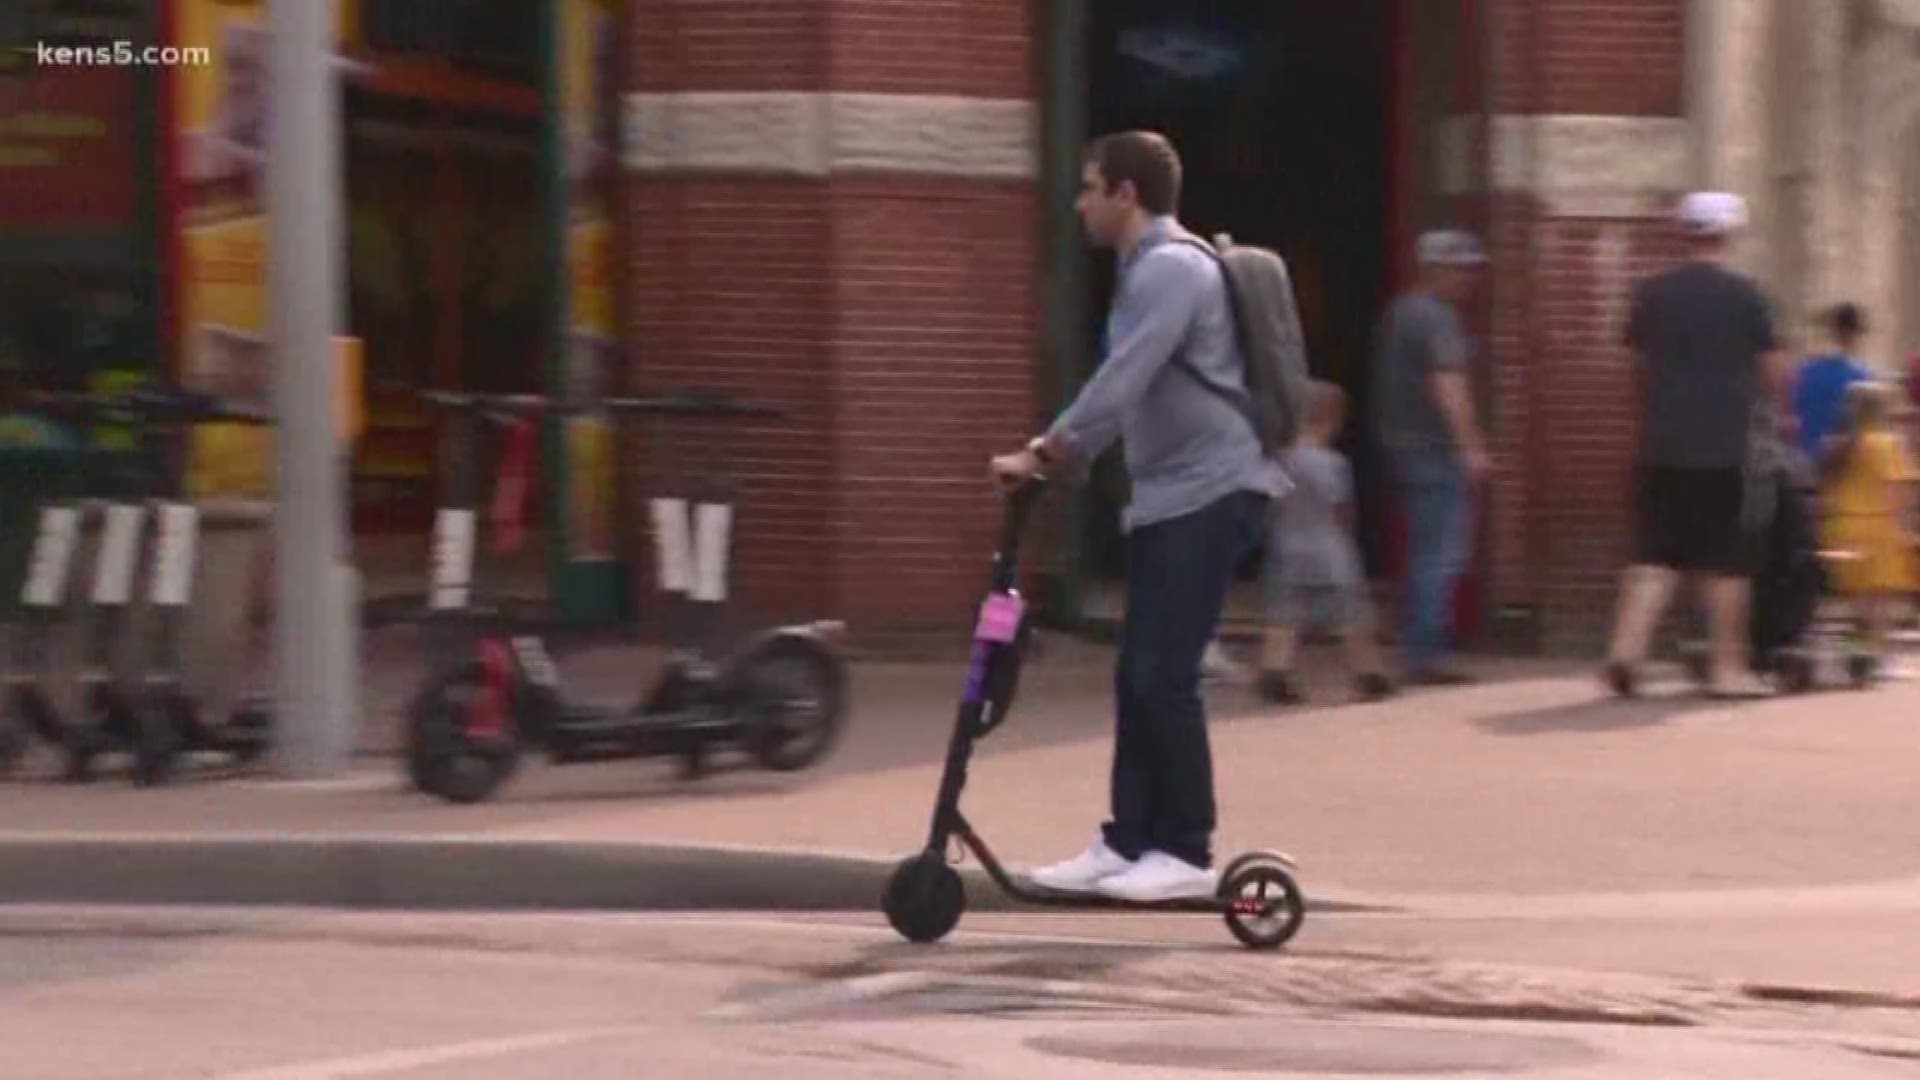 City council approved an amendment limiting e-scooter use to streets.